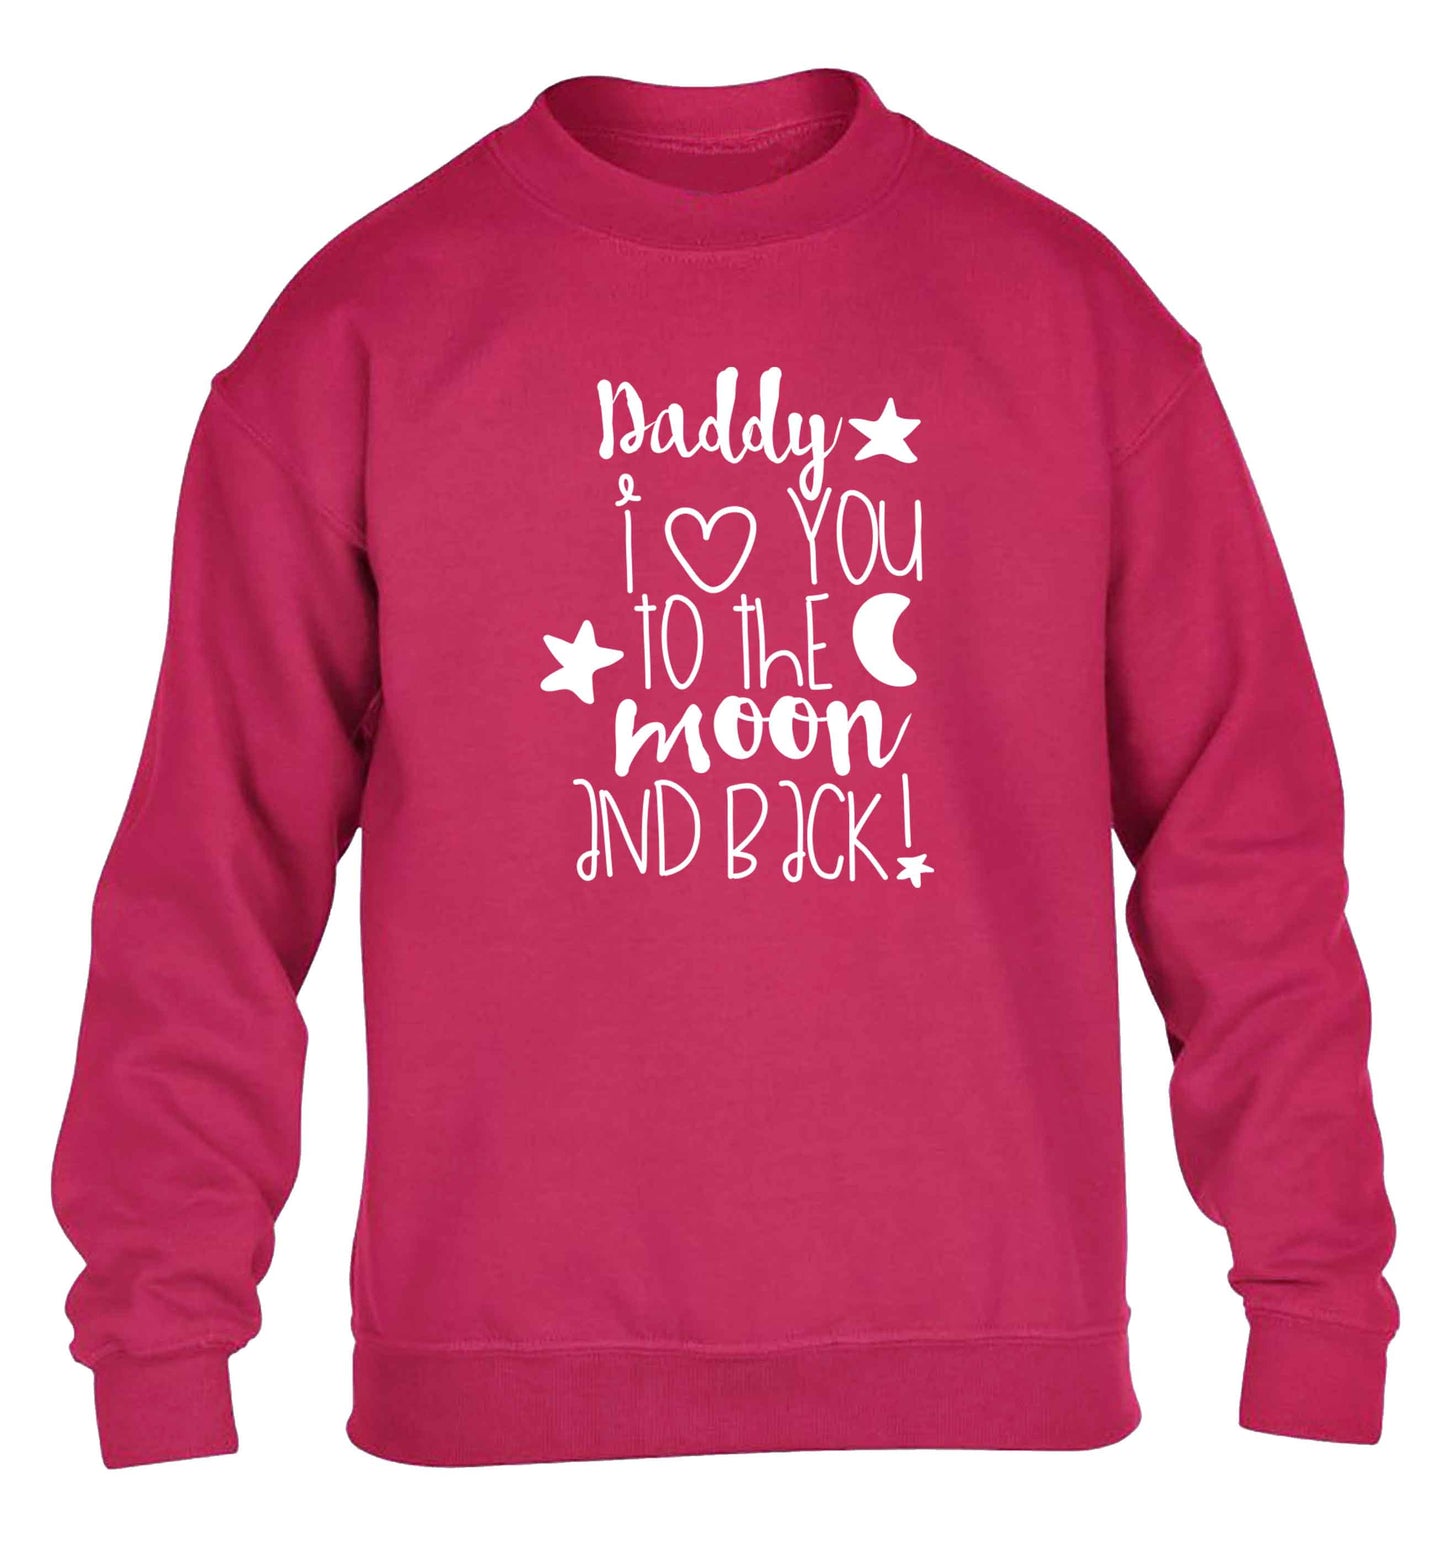 Daddy I love you to the moon and back children's pink sweater 12-13 Years